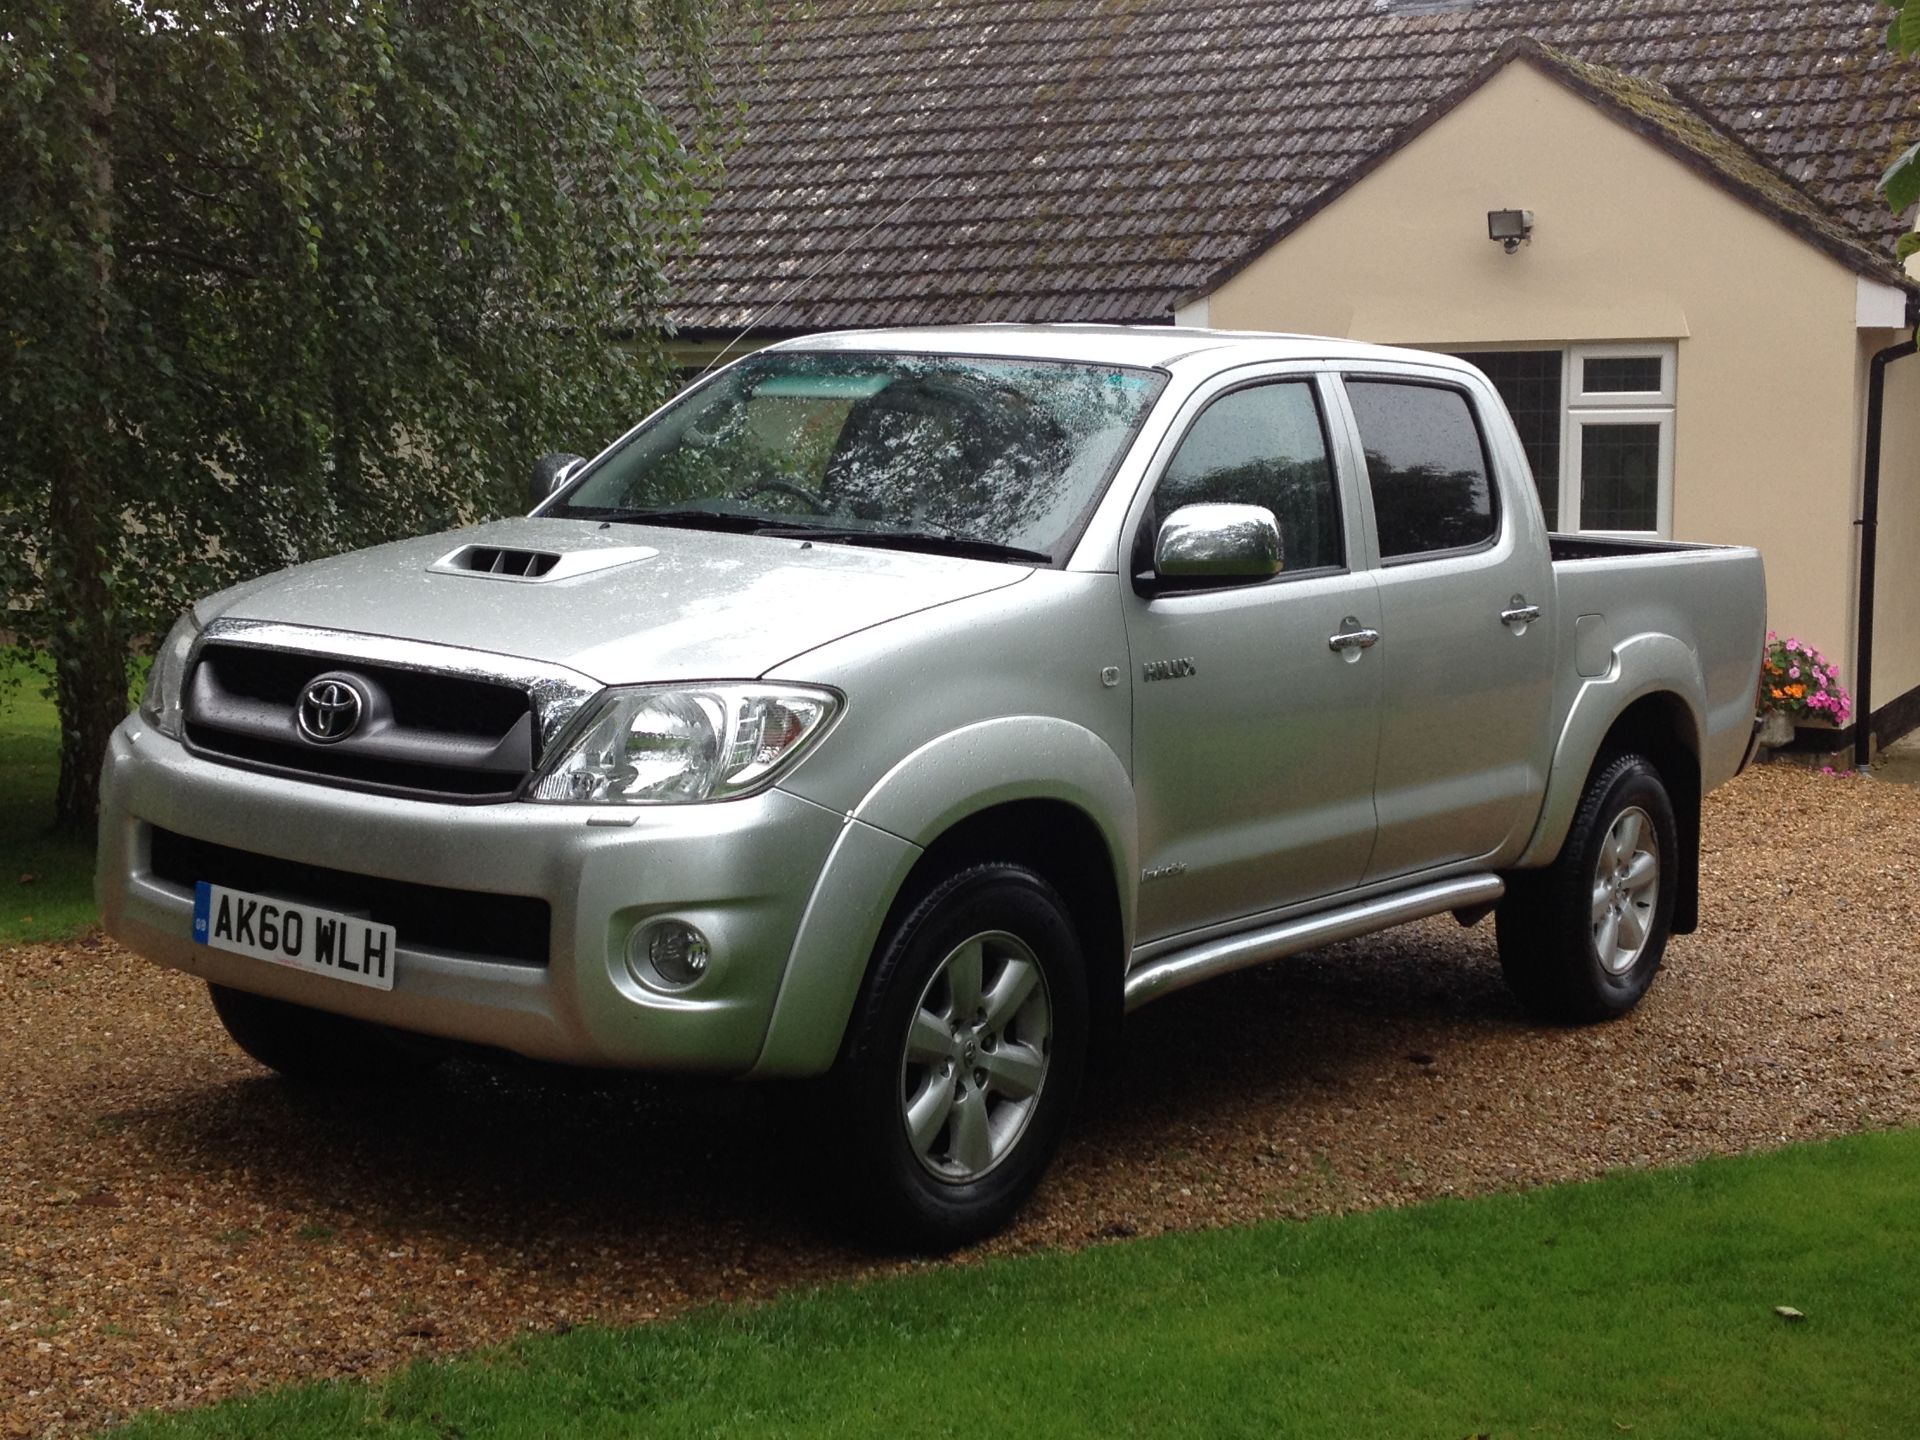 2010/60 REG TOYOTA HILUX INVINCIBLE D-4D 4x4 DOUBLE CAB PICKUP ONE OWNER FULL SERVICE HISTORY - Image 2 of 15